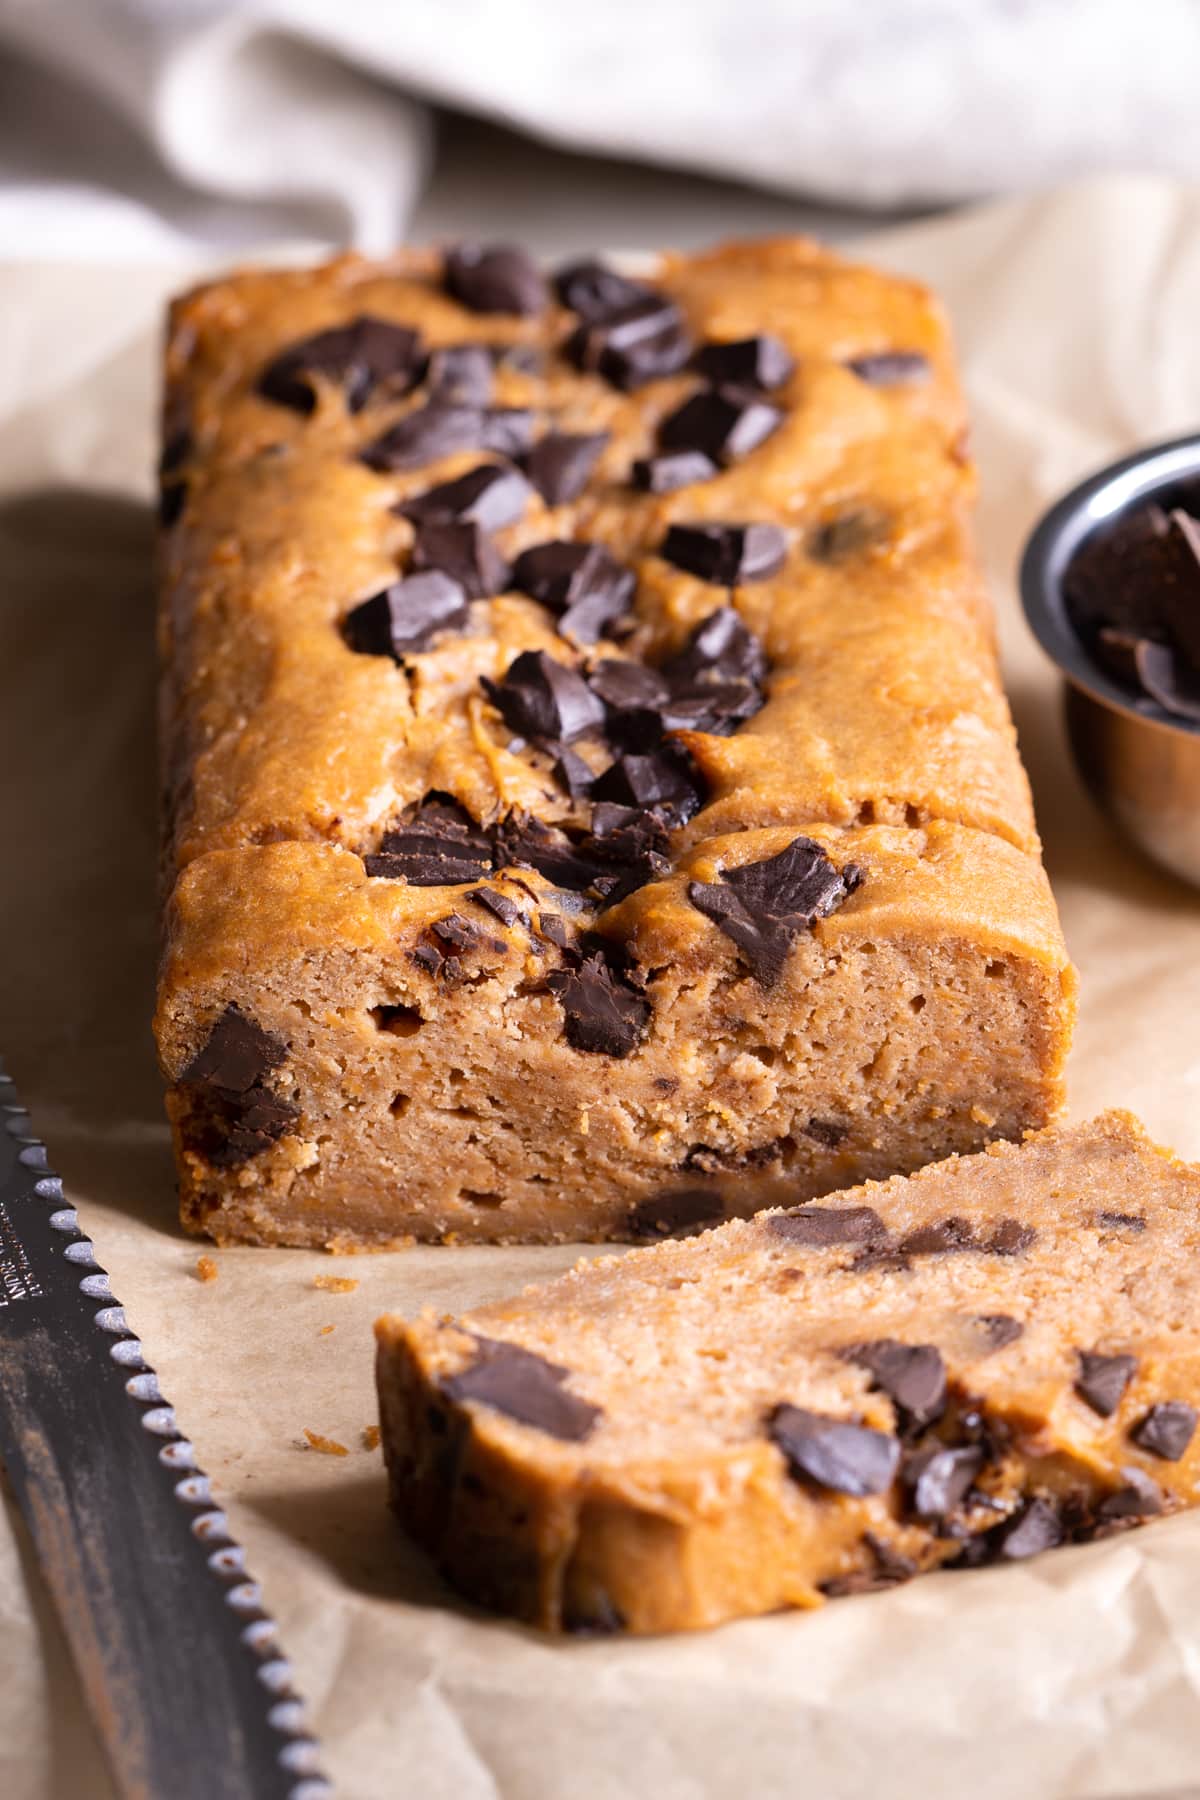 Sweet potato bread made with no eggs